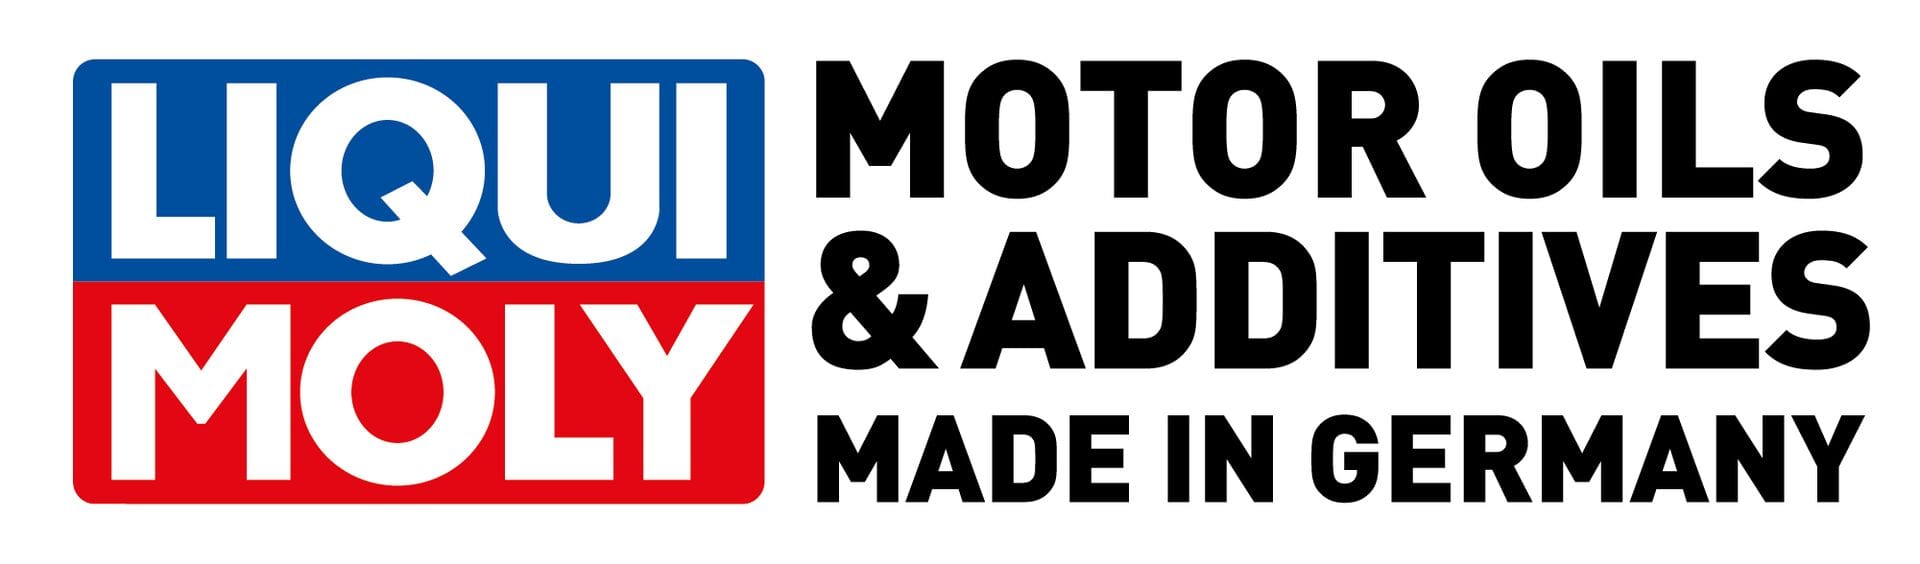 Liqui Moly - Top Tec 4200 5w30 Fully Syn Engine Oil - for VW504.00